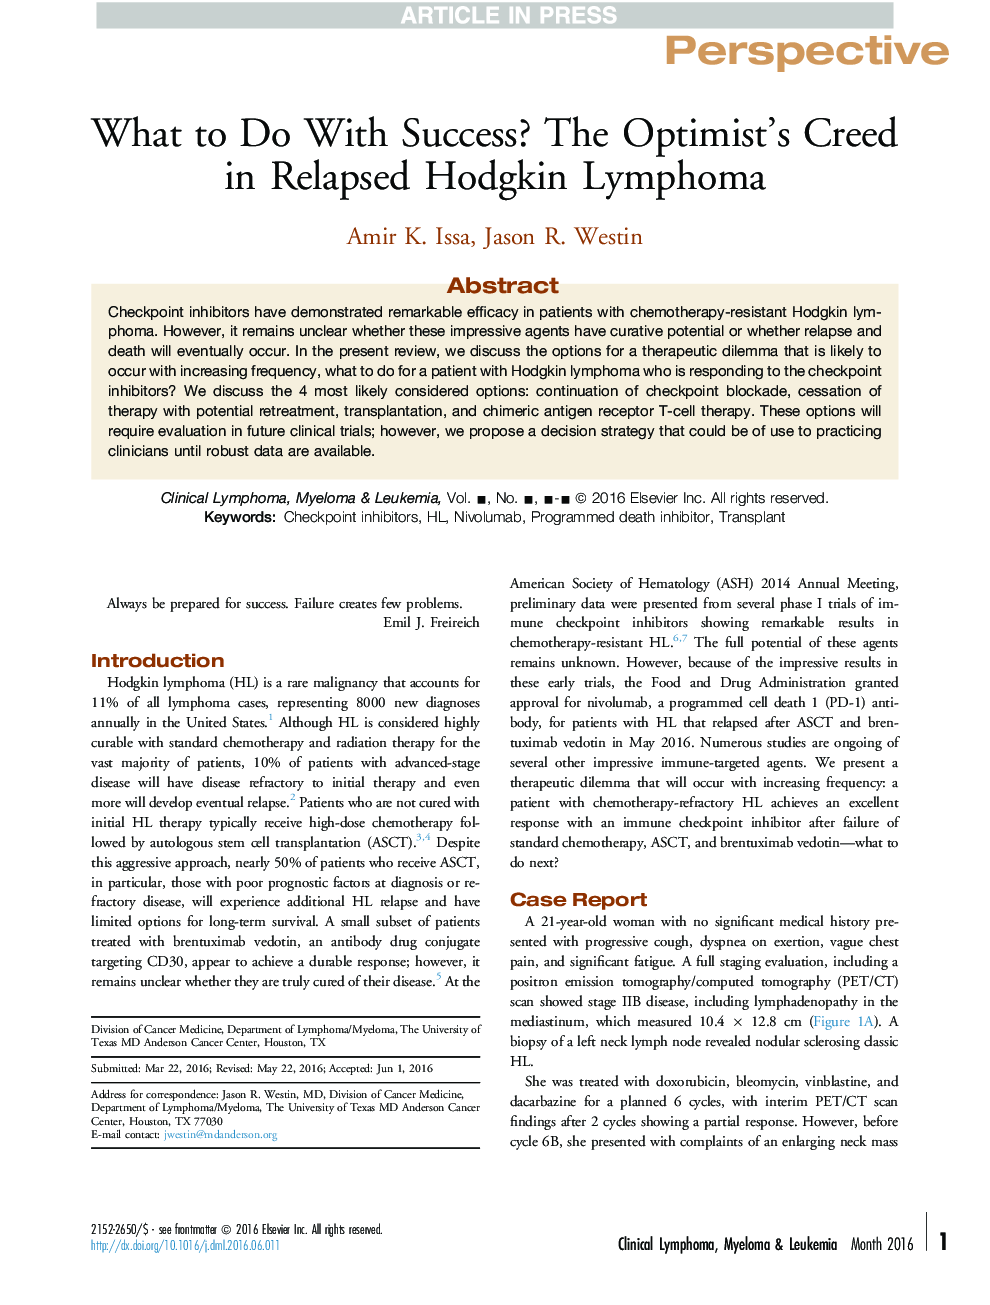 What to Do With Success? The Optimist's Creed in Relapsed Hodgkin Lymphoma